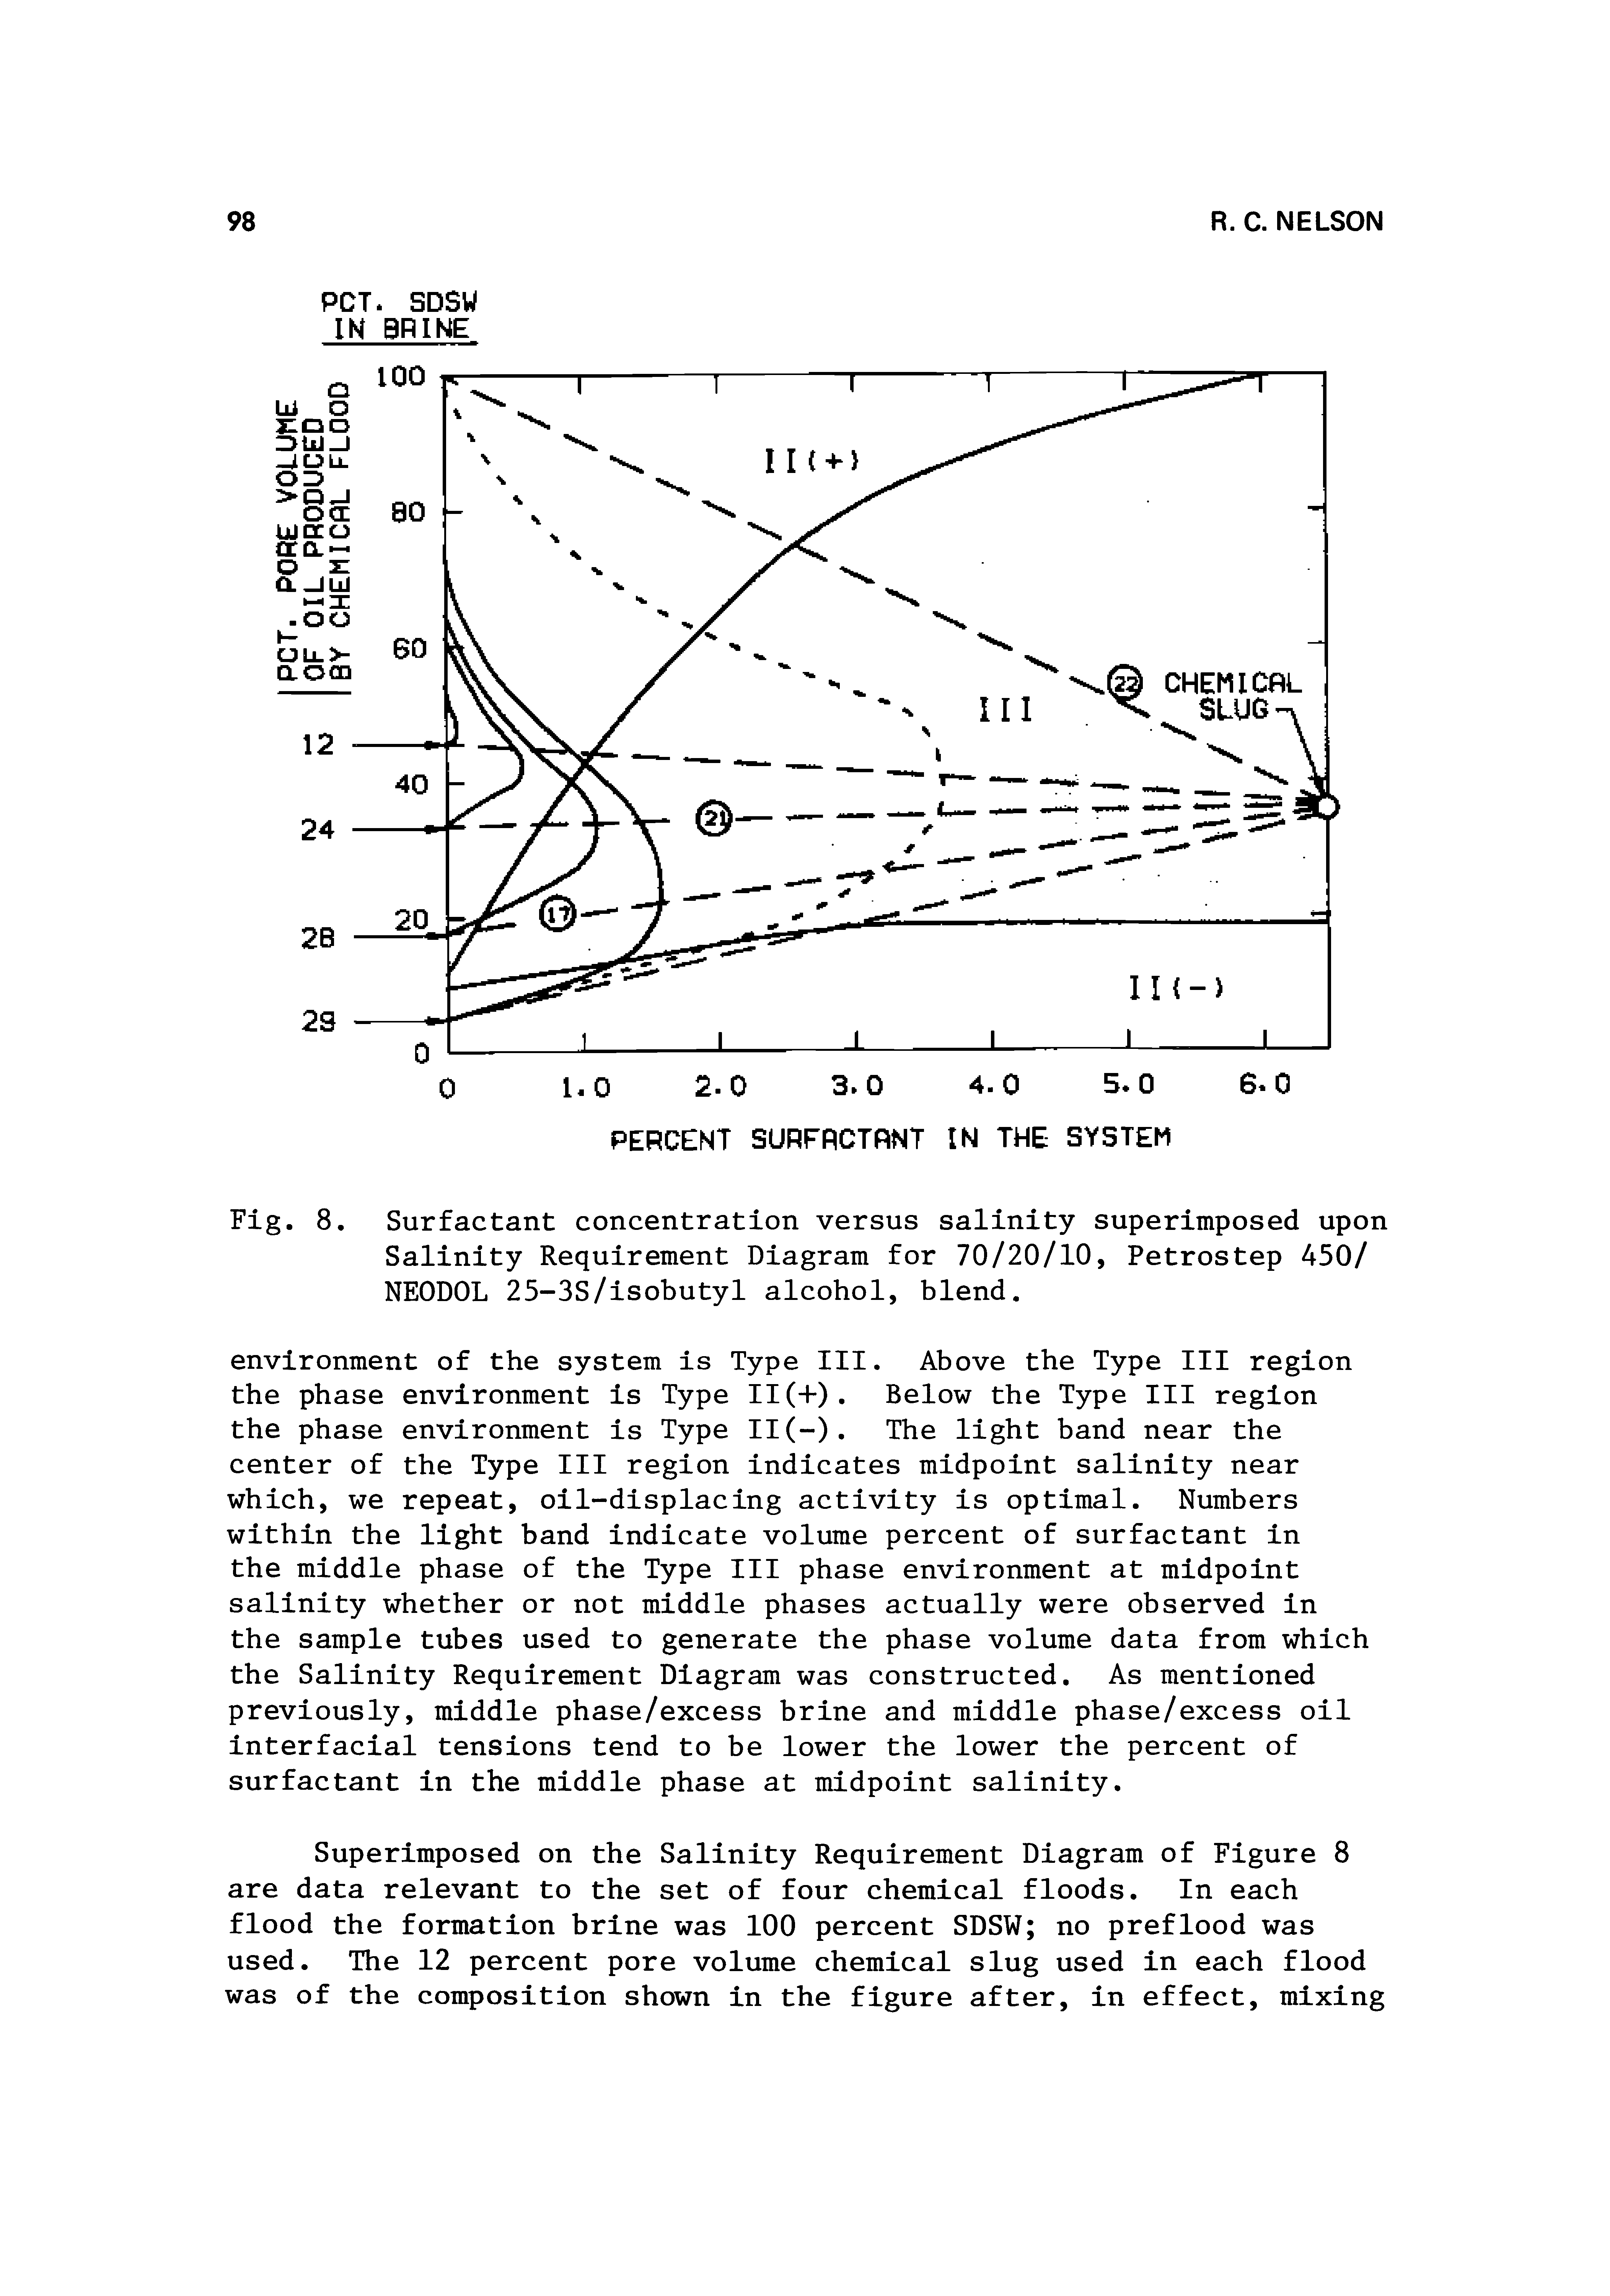 Fig. 8. Surfactant concentration versus salinity superimposed upon Salinity Requirement Diagram for 70/20/10, Petrostep 450/ NEODOL 25-3S/isobutyl alcohol, blend.